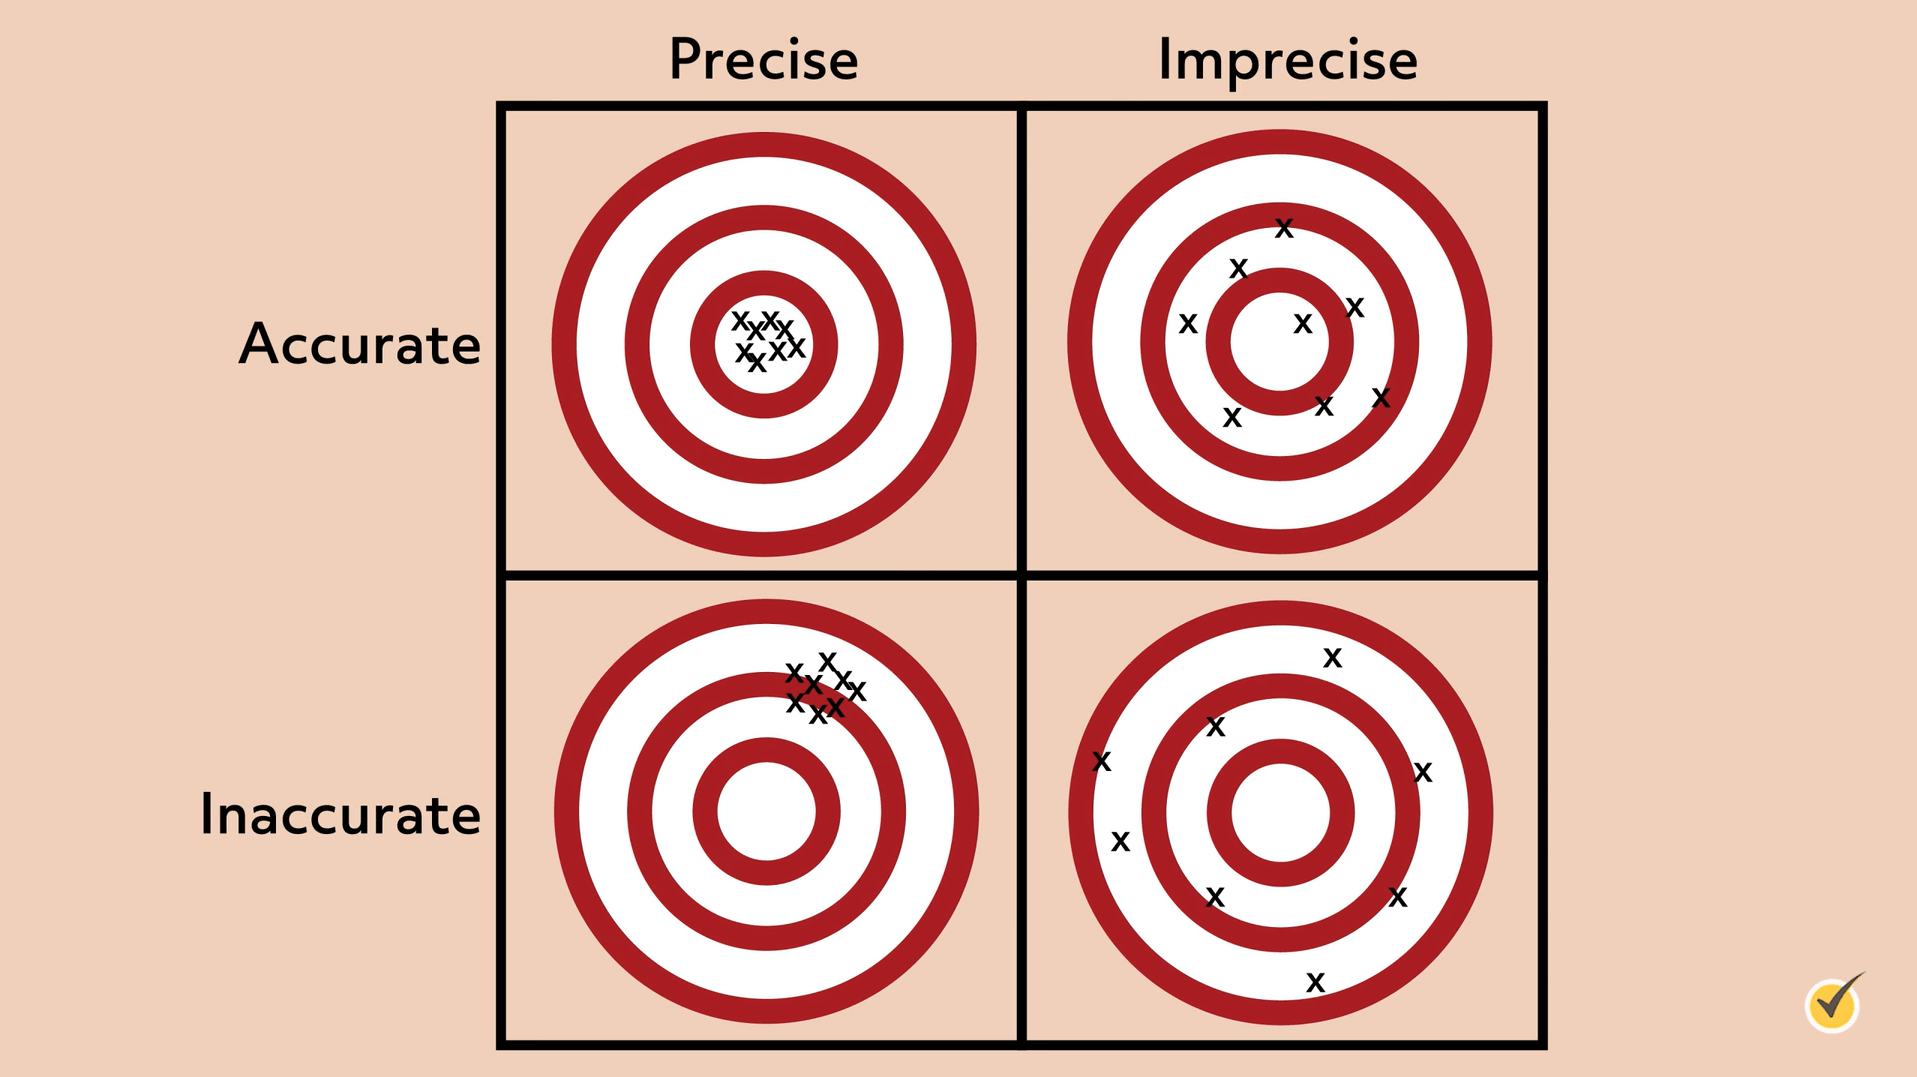 Image of 4 targets; the top left is accurate and precise with all the x's in the bulls eye, the top right is imprecise but accurate with x's scattered around the bulls-eye, the bottom left target is inaccurate but precise, and the bottom right is imprecise and inaccurate. 